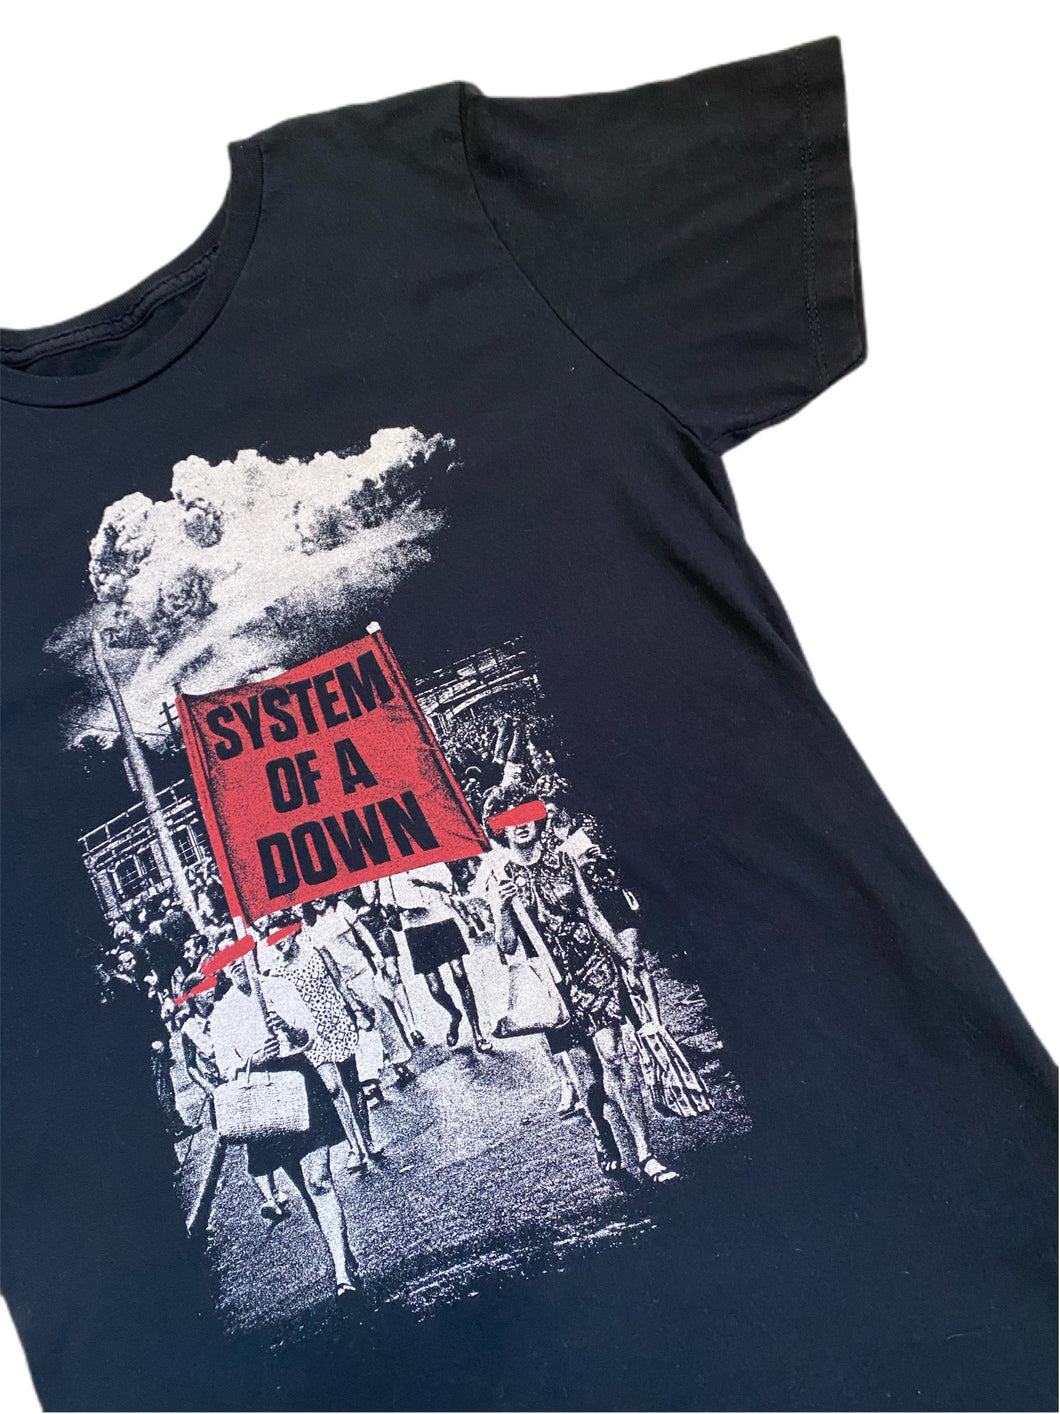 90's vintage system of a down band tee